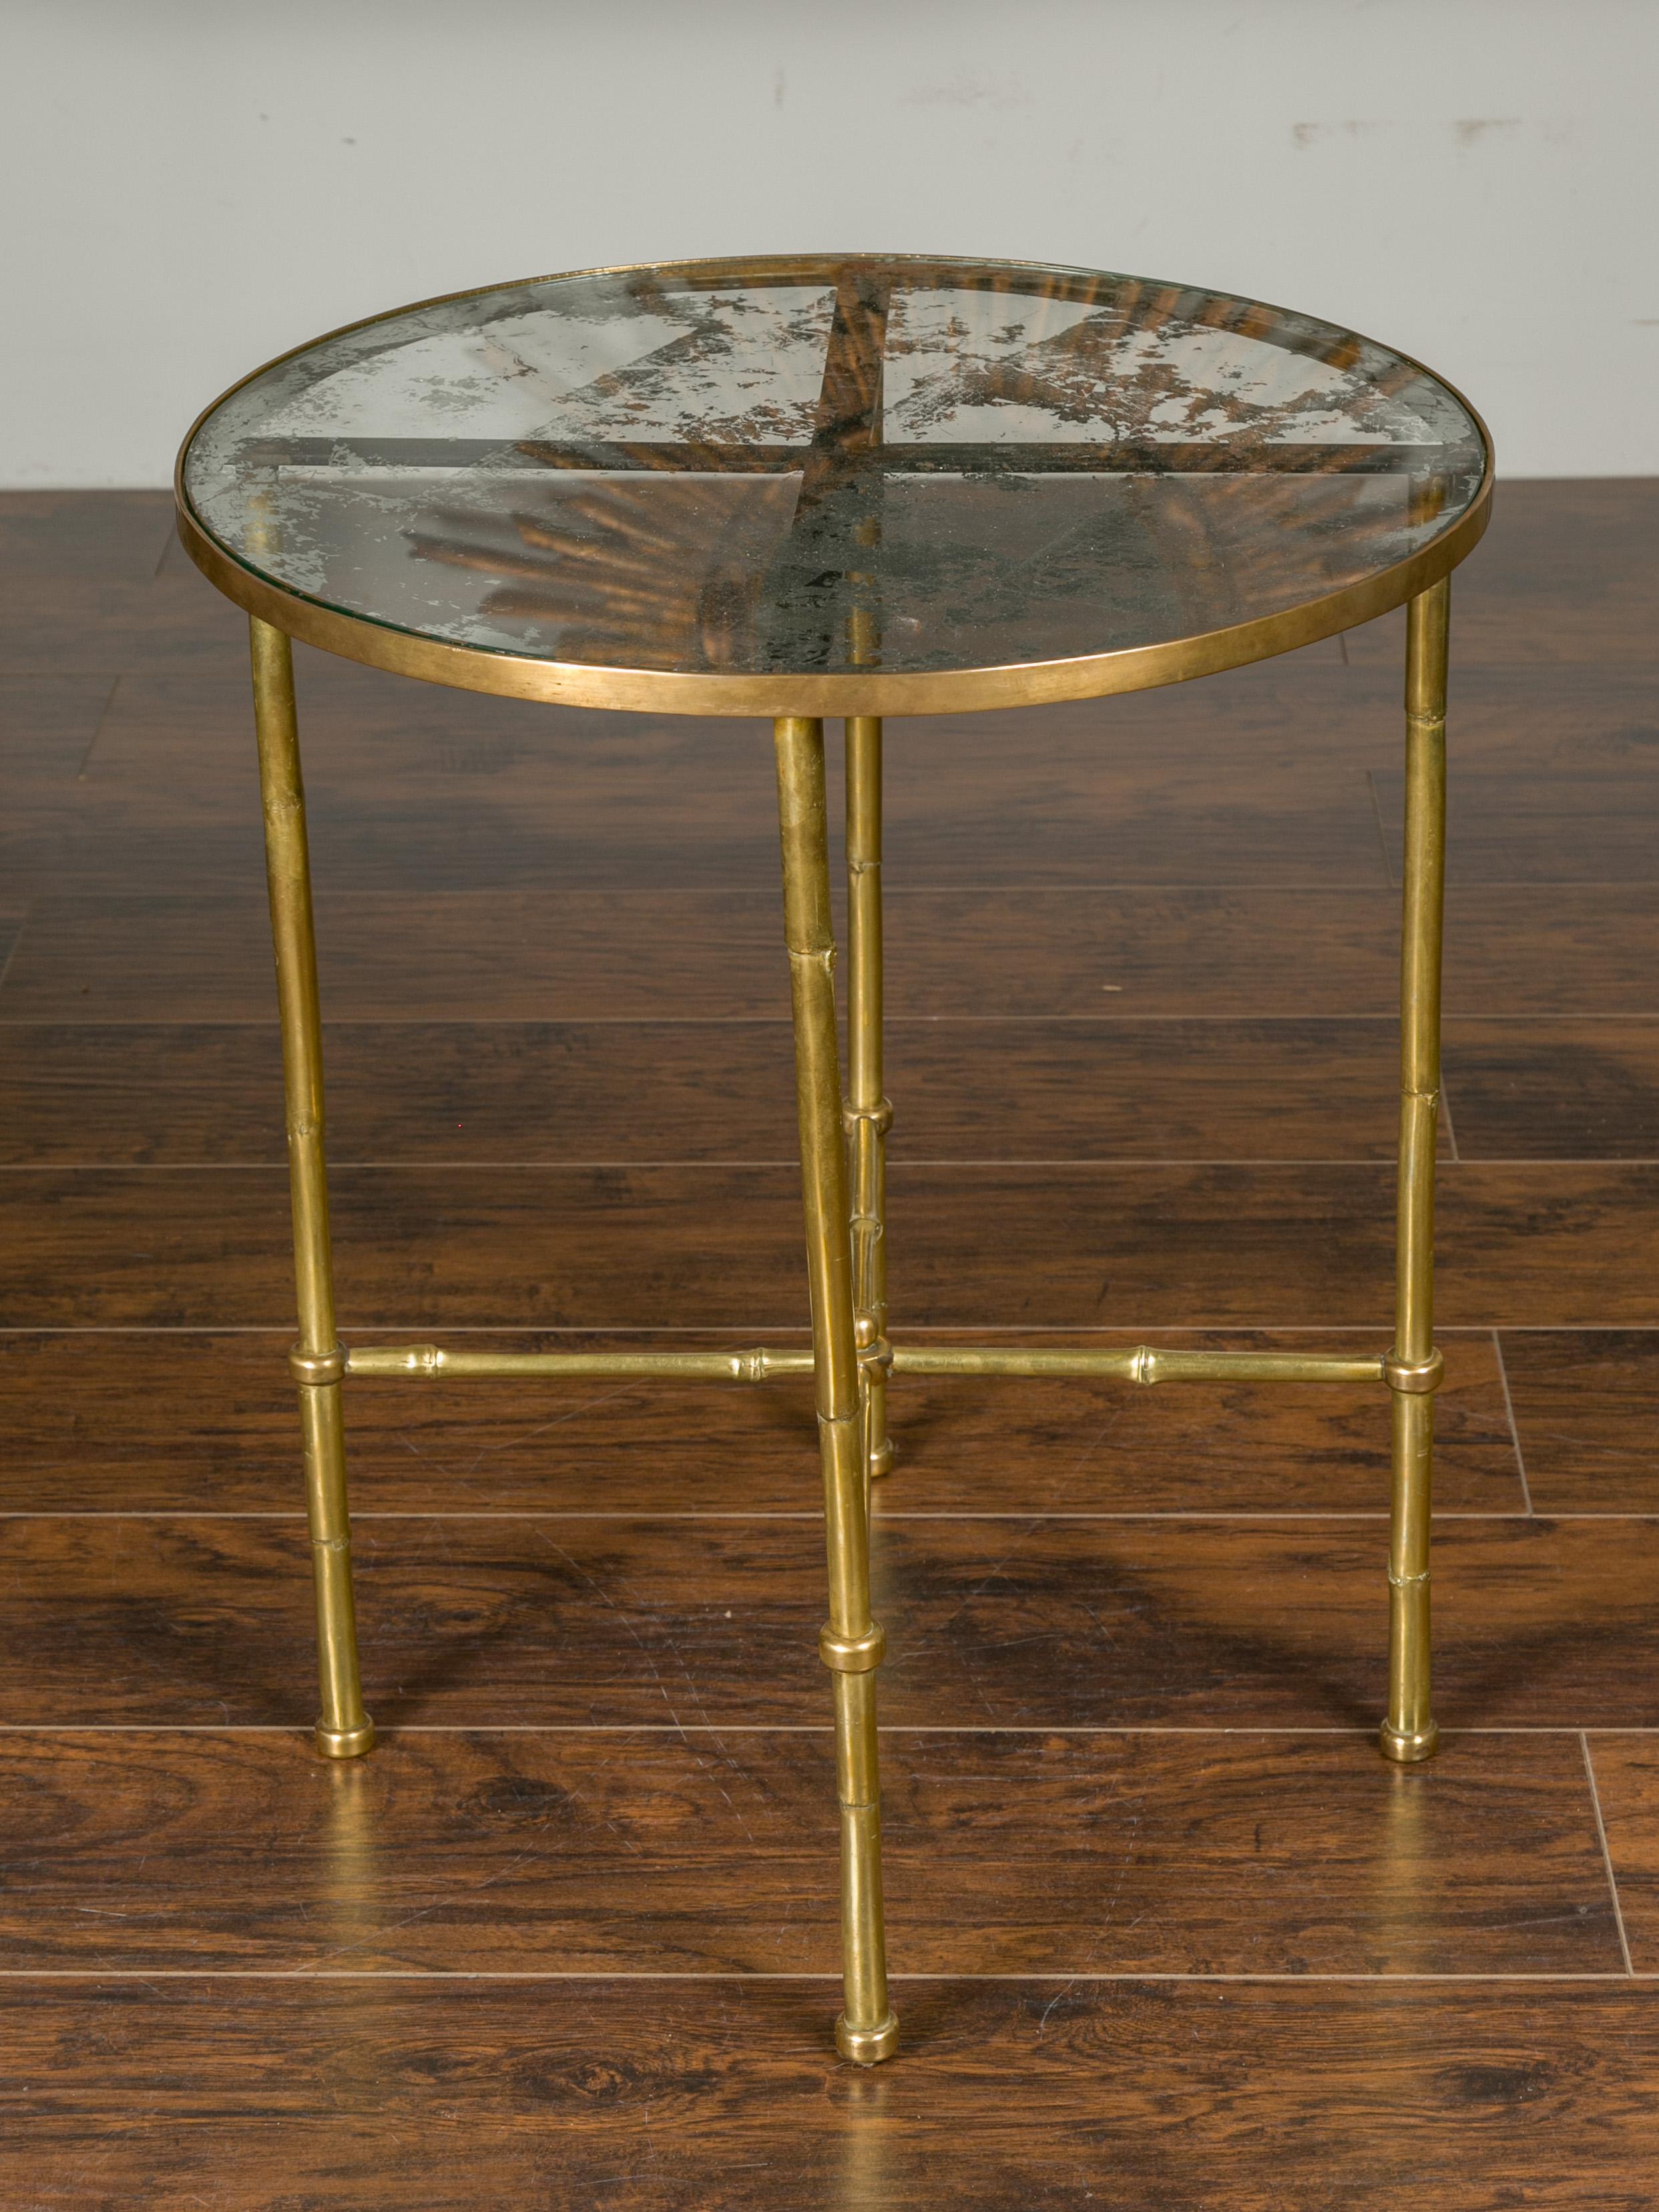 Italian Midcentury Brass Bamboo-Inspired Side Table with Distressed Glass Top For Sale 4